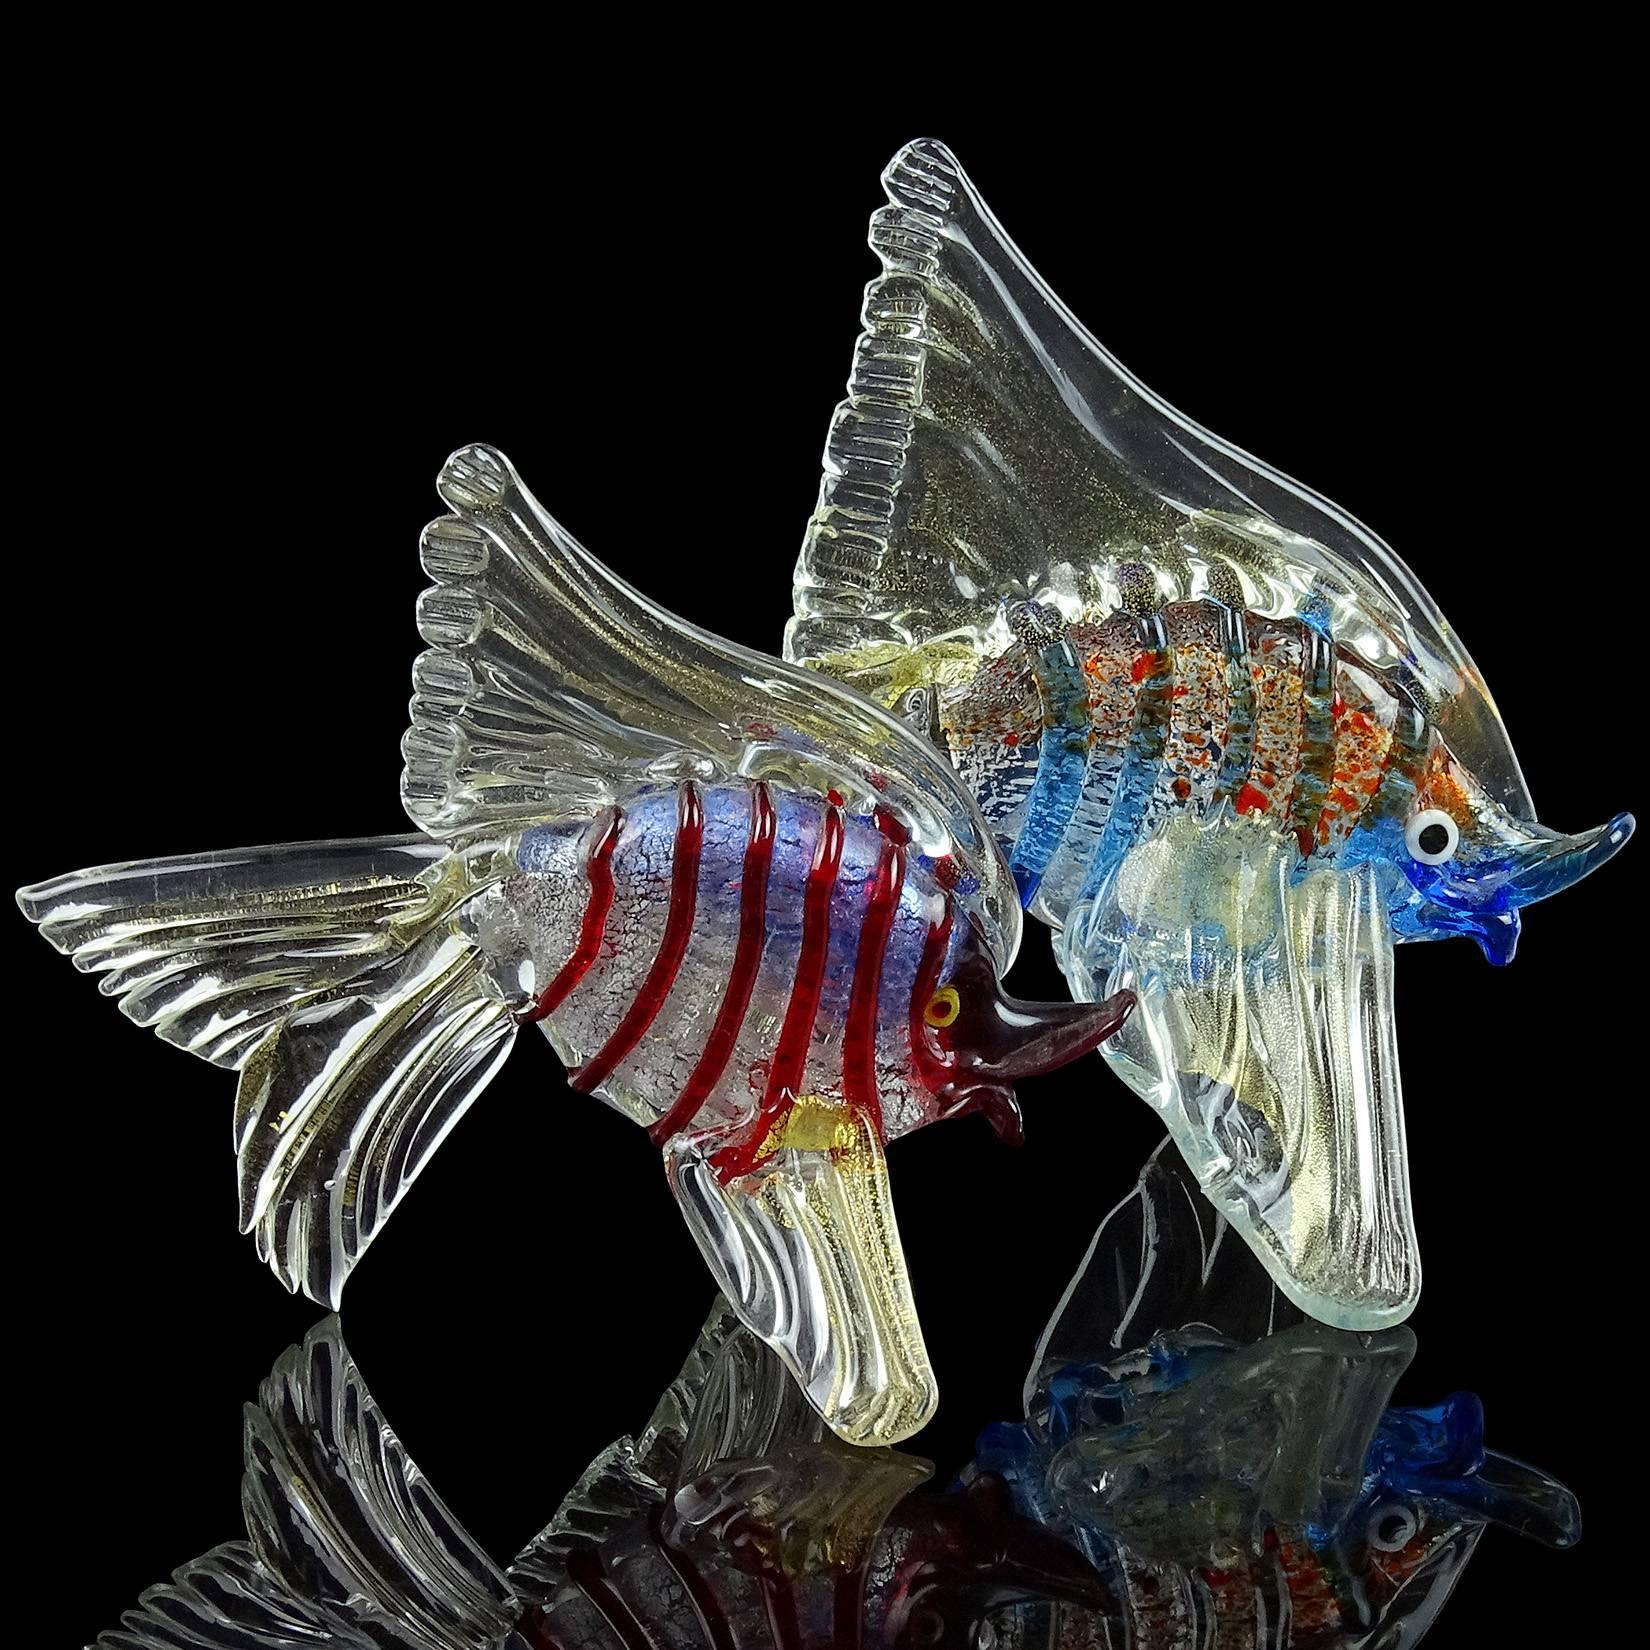 Hand-Crafted Cenedese Murano Striped Silver and Gold Flecks Italian Art Glass Fish Sculptures